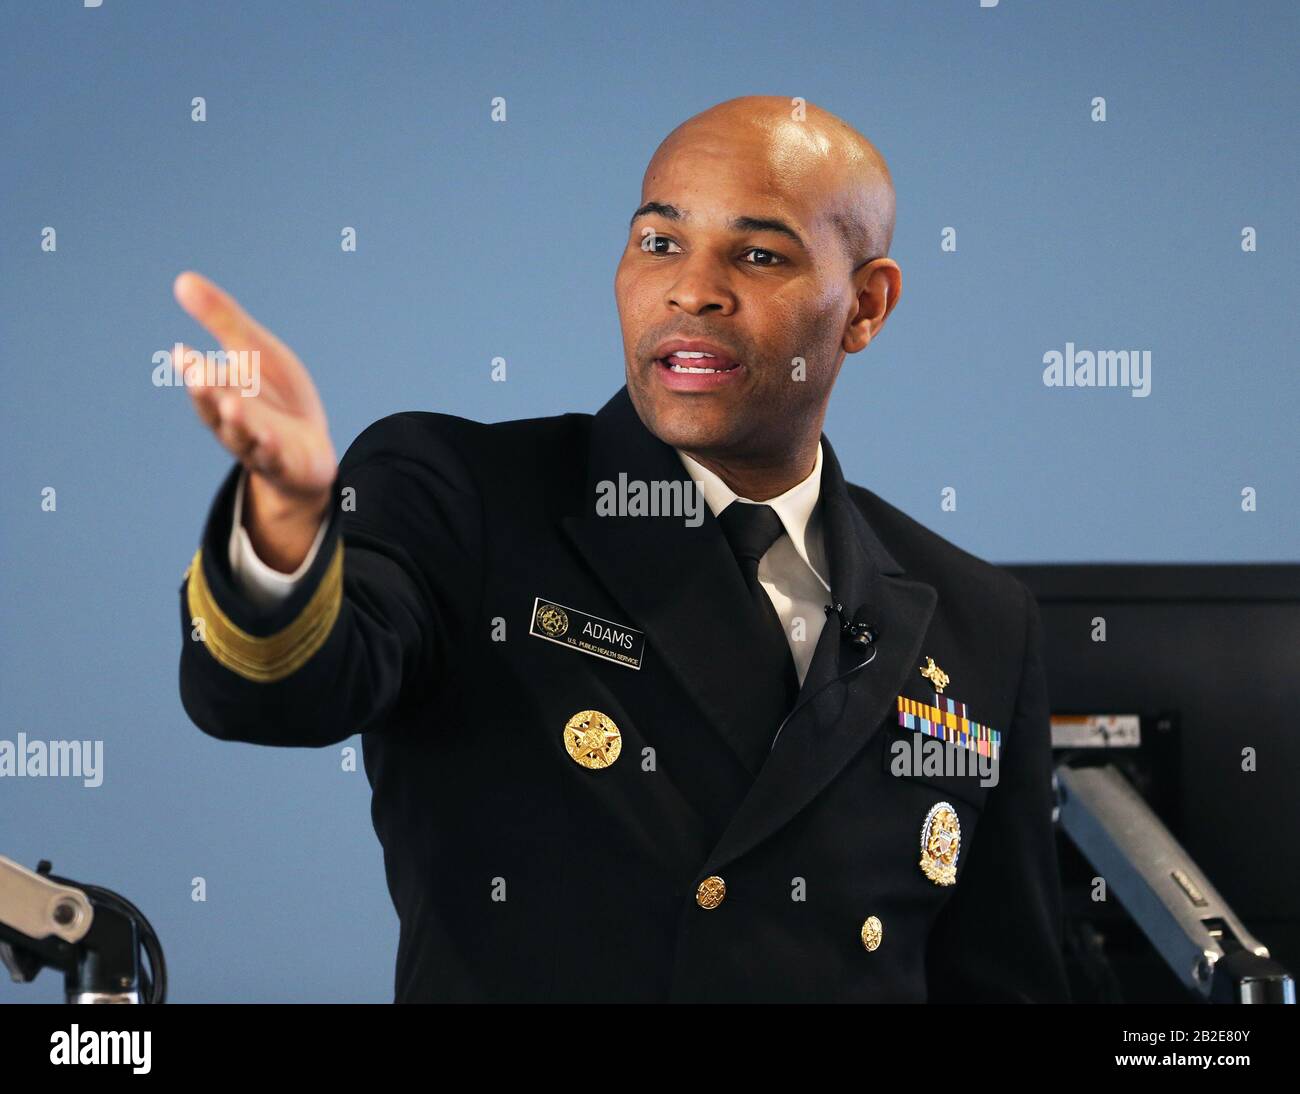 New Haven, CT, USA. 2nd Mar, 2020. New Haven, Connecticut - March 2, 2020: Surgeon General Vice-Admiral Jerome Adams visits the Yale School of Public Health, discussing his priorities as the Nation's Doctor, maternal health and the maternal mortality rate, as well as COVID-19 and the related precautions Americans can take. Credit: Stan Godlewski/ZUMA Wire/Alamy Live News Stock Photo